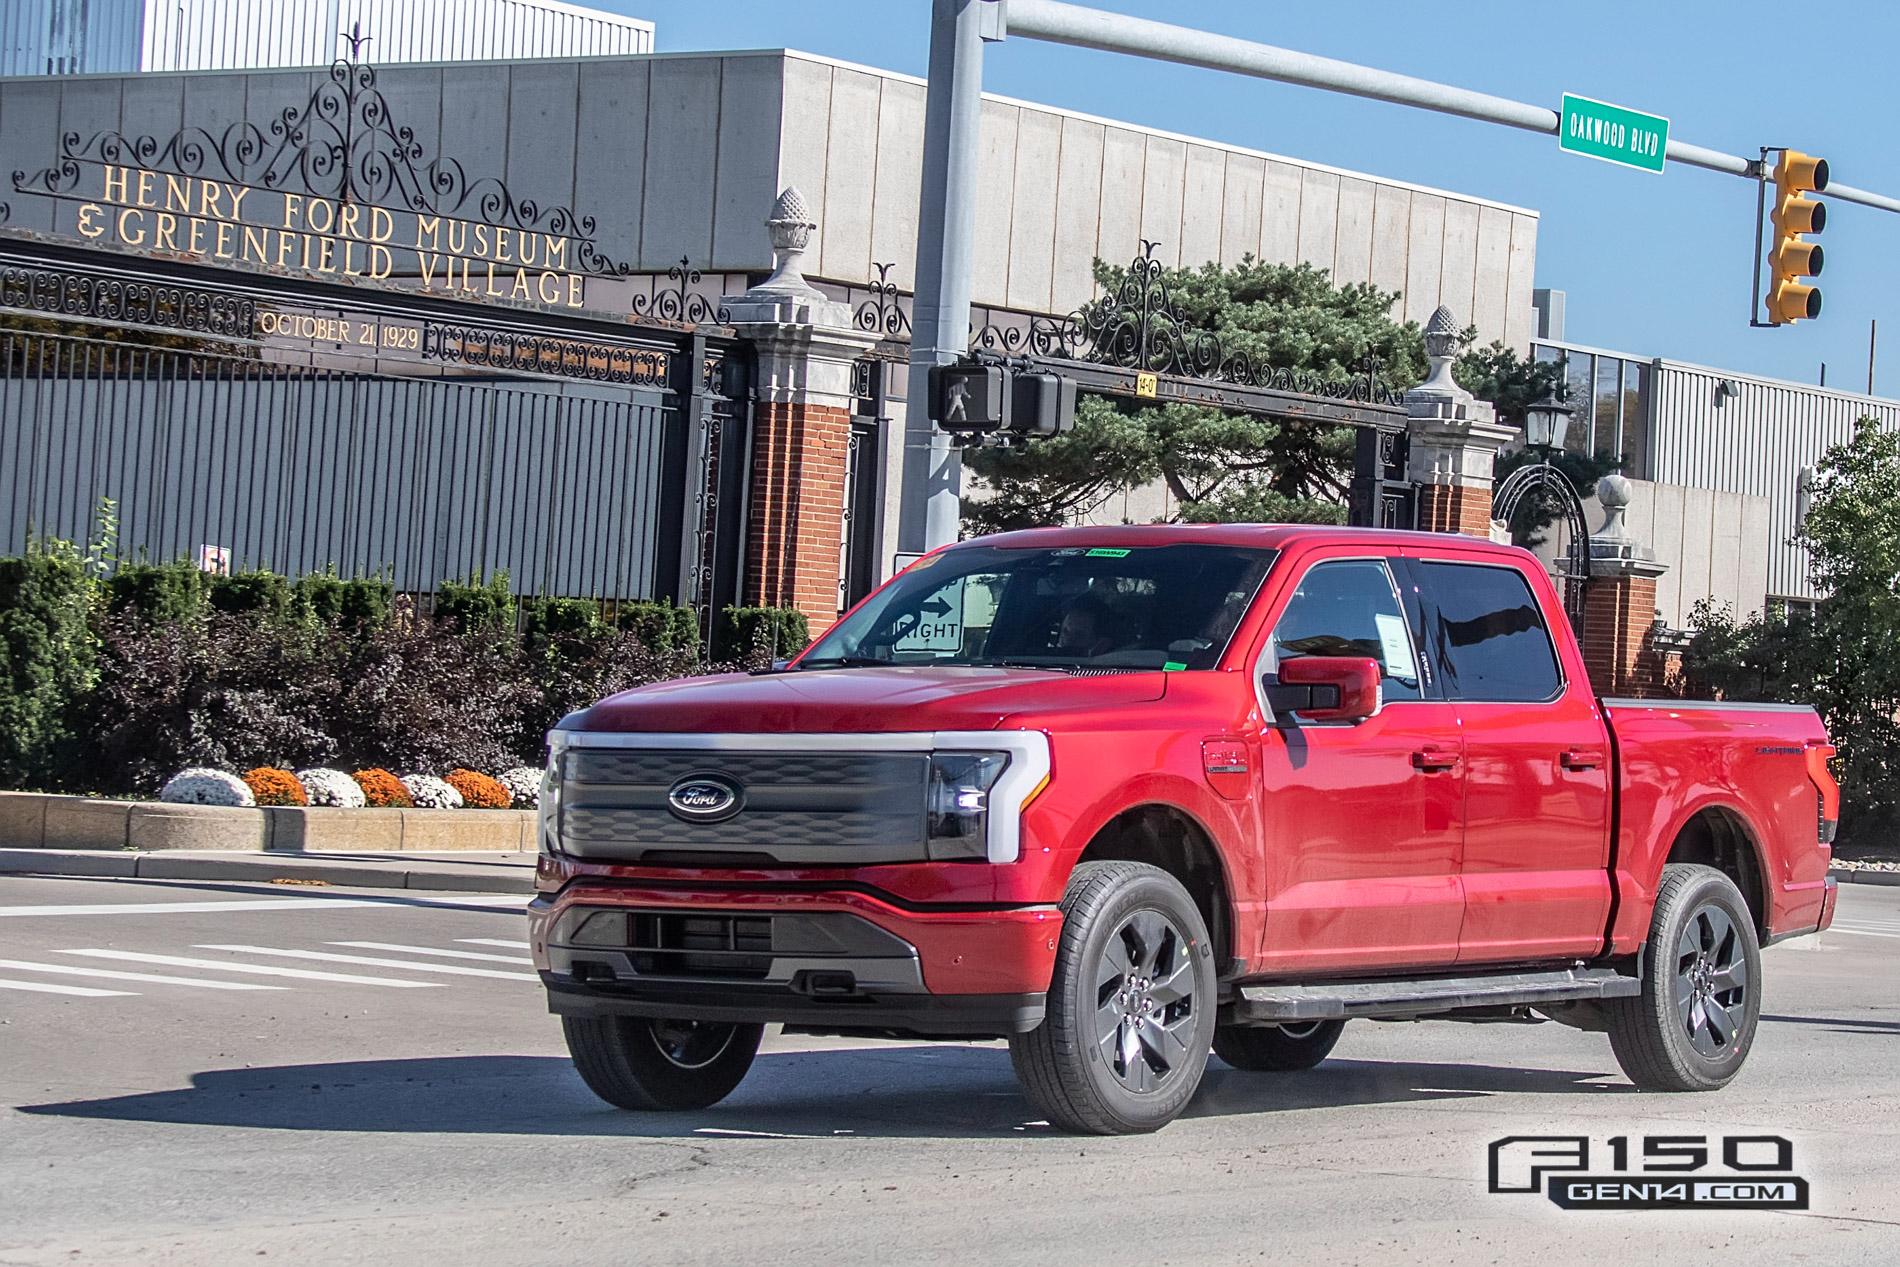 Ford F-150 Lightning F-150 Lightning Platinum (Iconic Silver) & Lariat (Rapid Red) Spotted On Public Roads Production Rapid Red 2022 F150 Lightning Lariat EV Pickup Truck 3